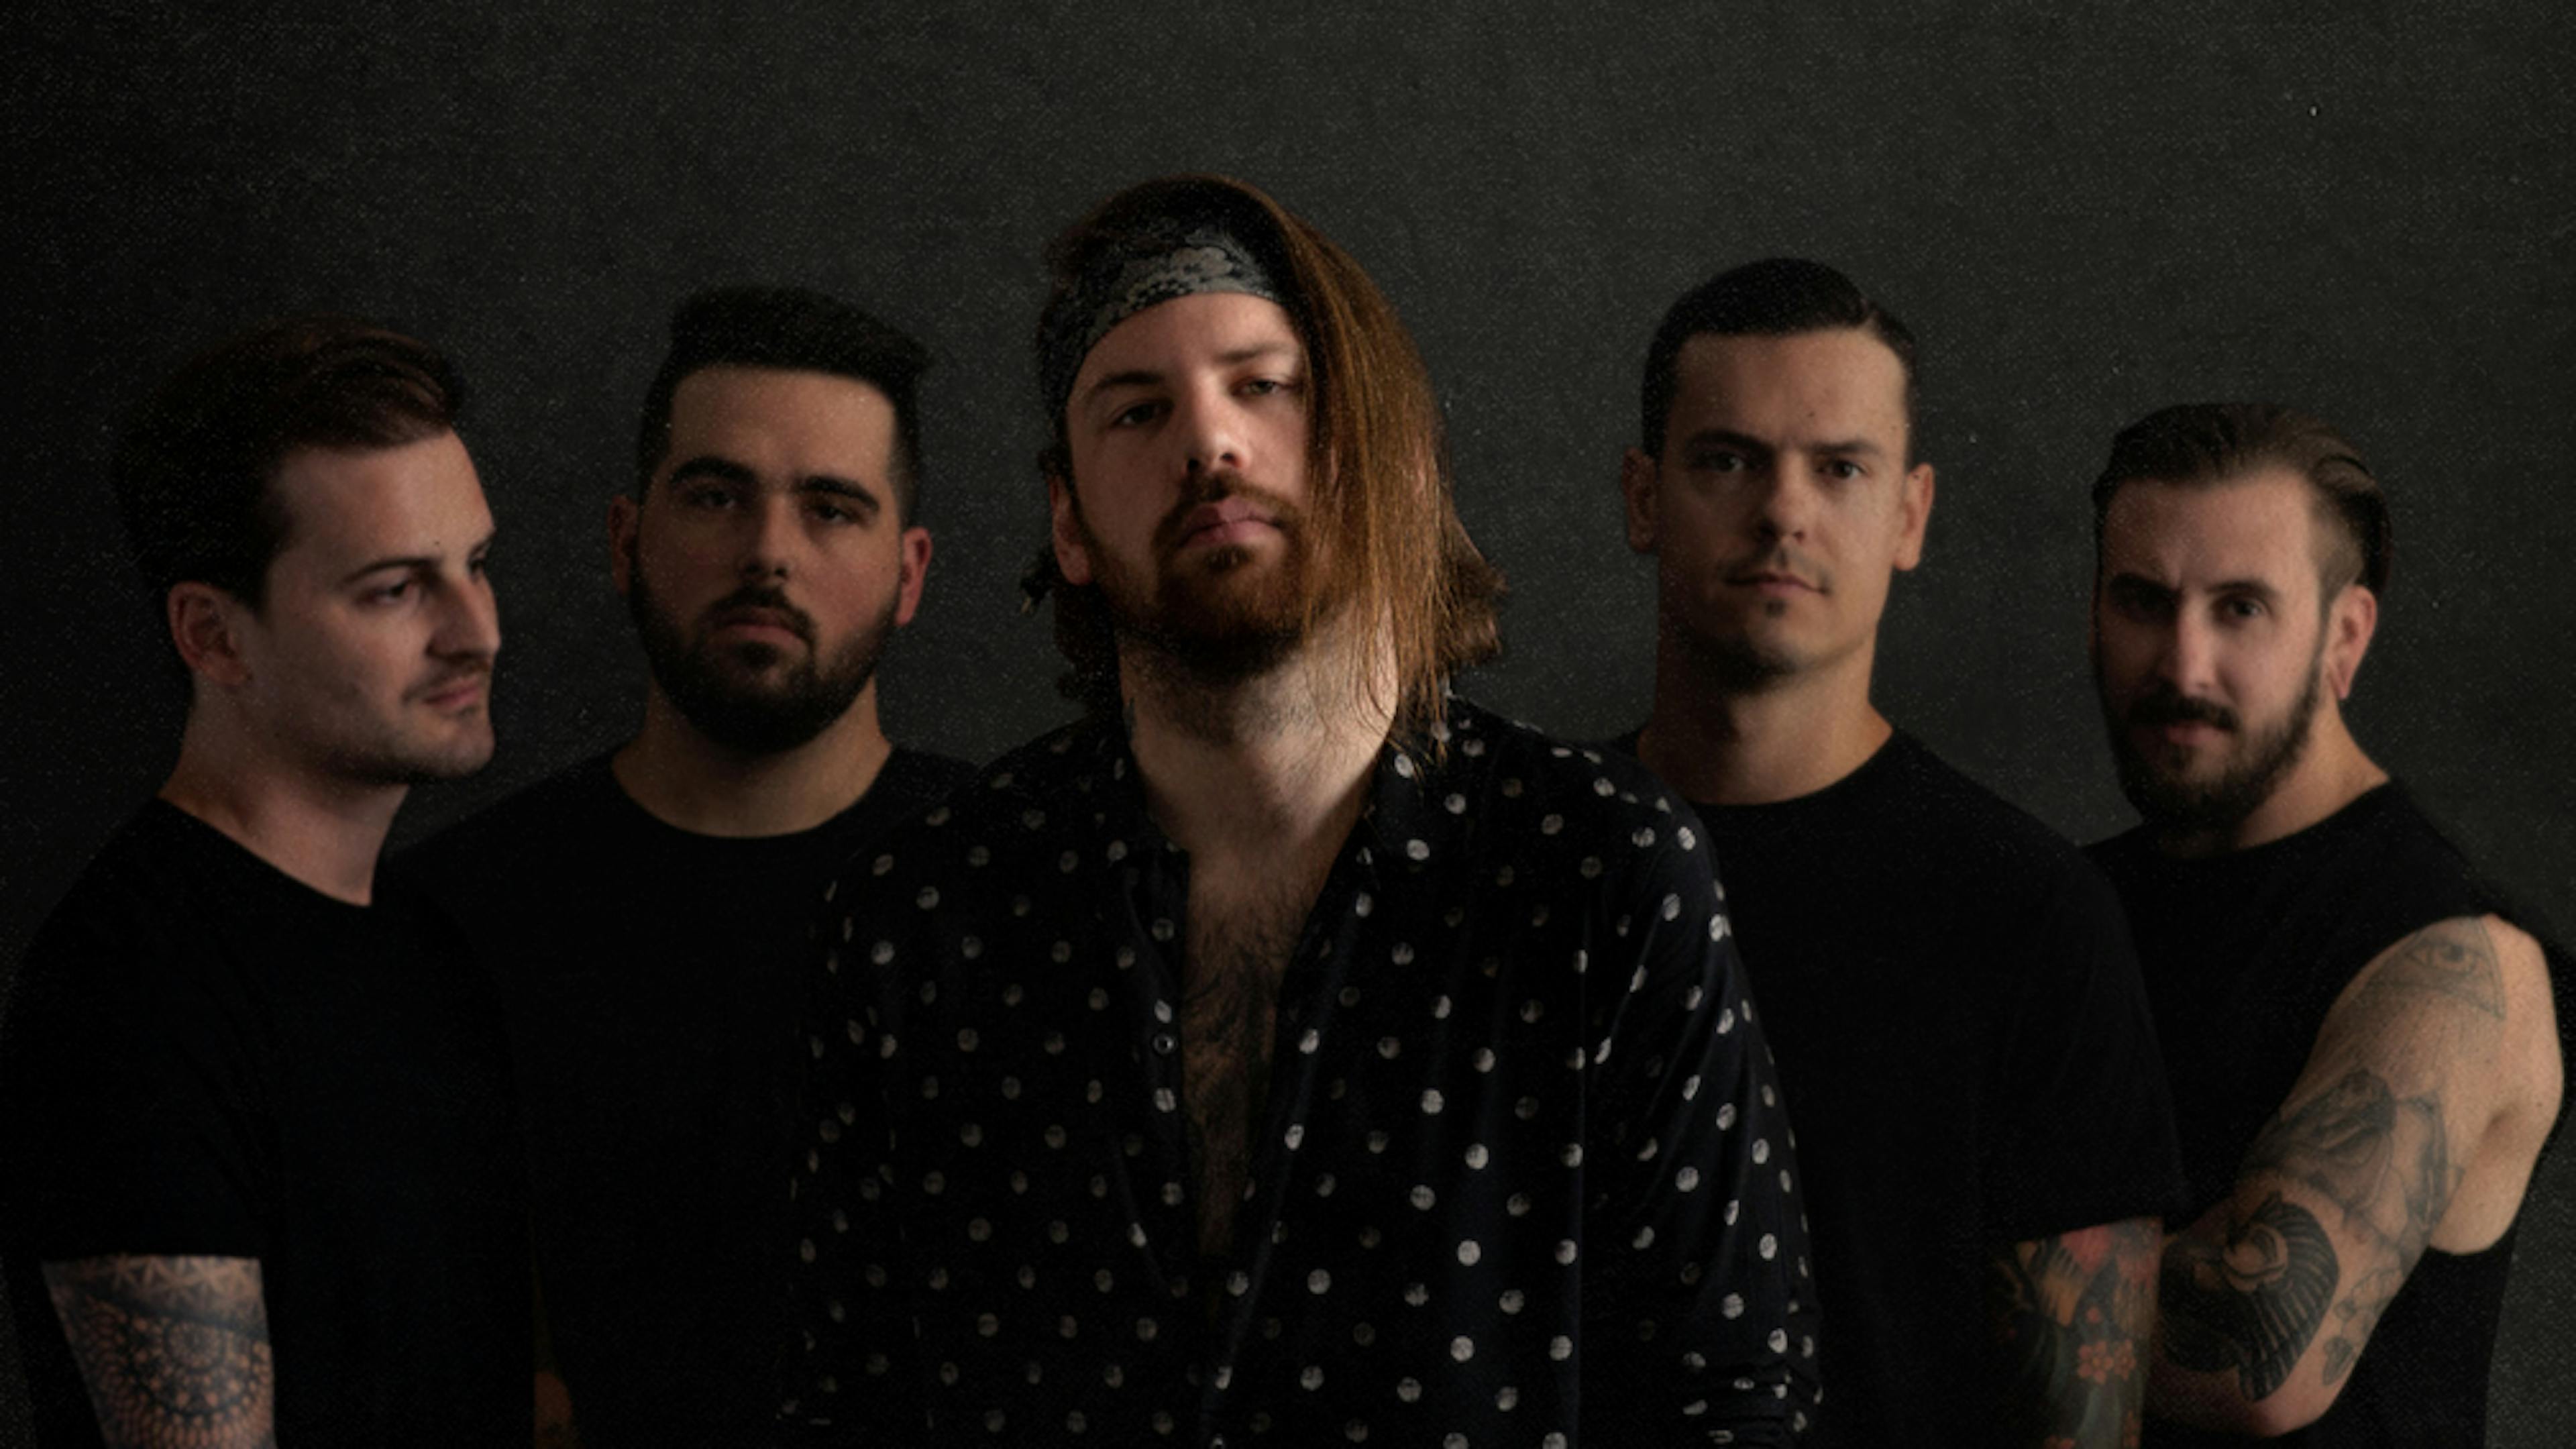 Caleb Shomo: "This Was Hands-Down The Most Difficult Record I’ve Ever Made"